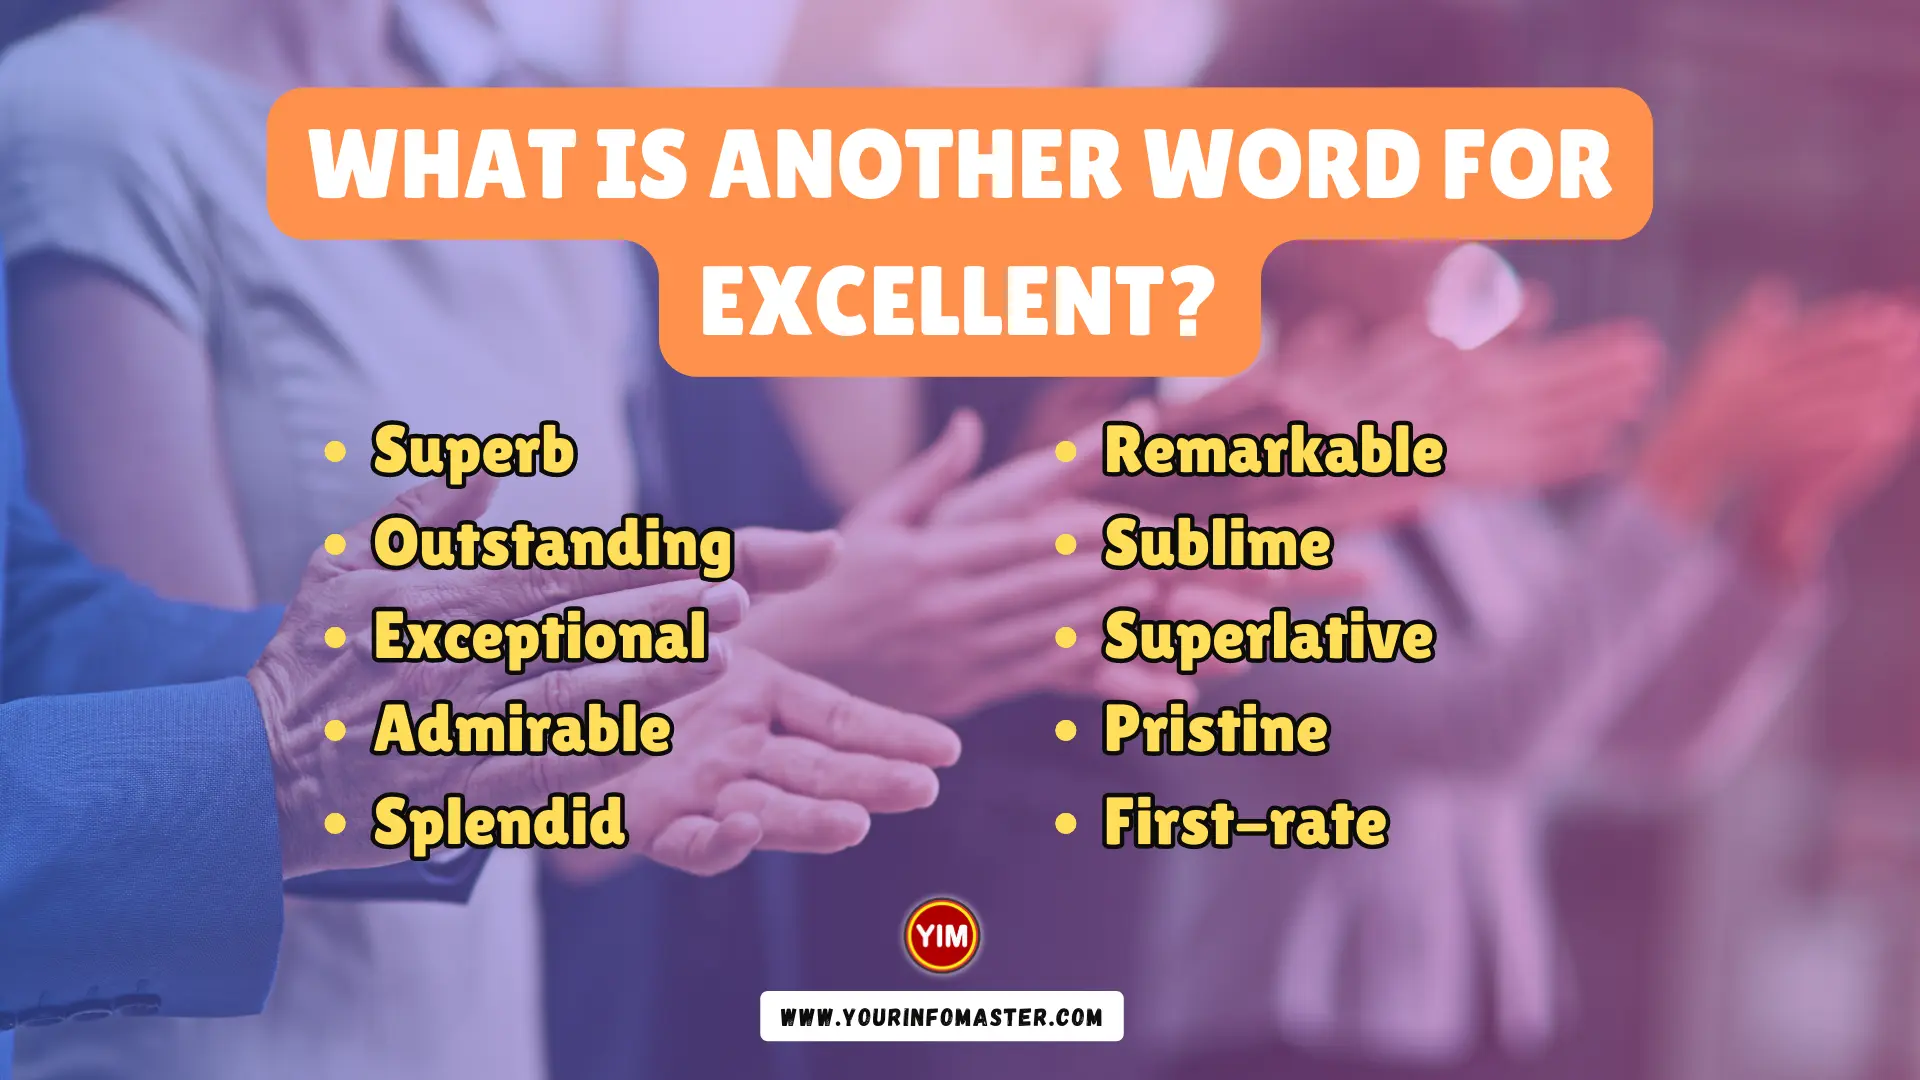 What is another word for Excellent